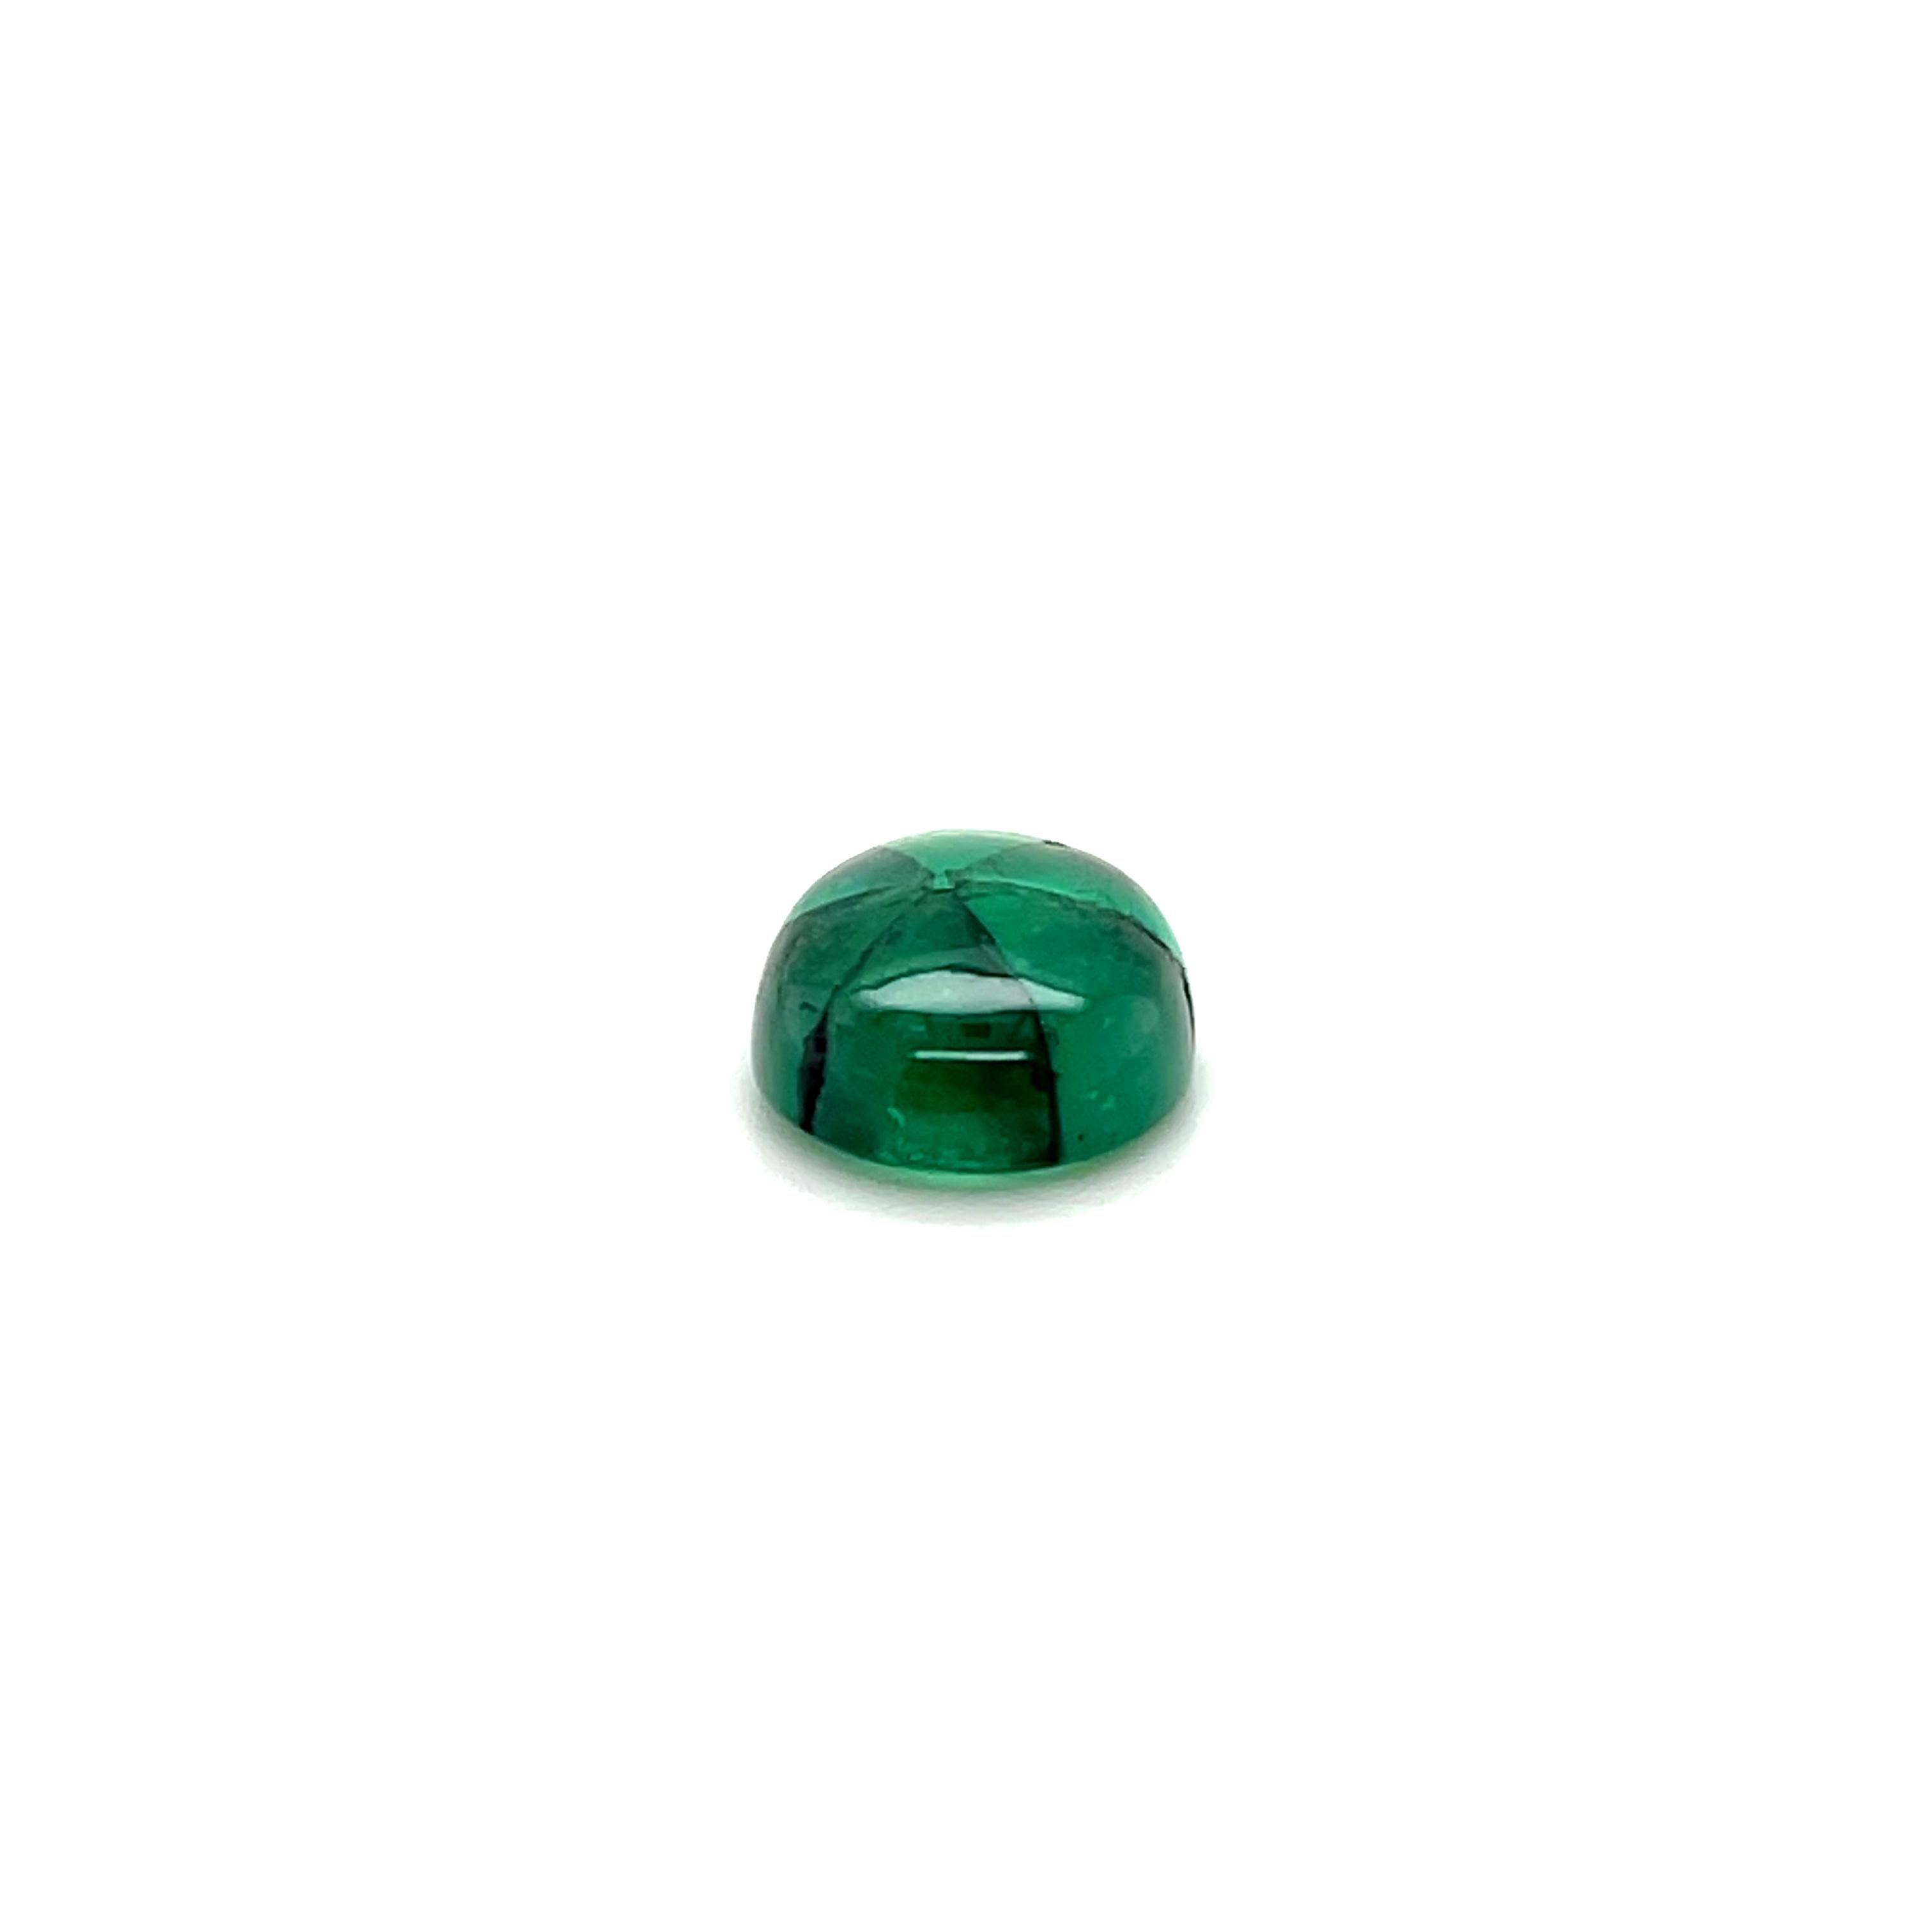 Excellence Quality Certified Natural 99.00 Carat Faceted Round Cut Muzo Colombian Trapiche Emerald Loose Gemstone One Time Sale ! JI